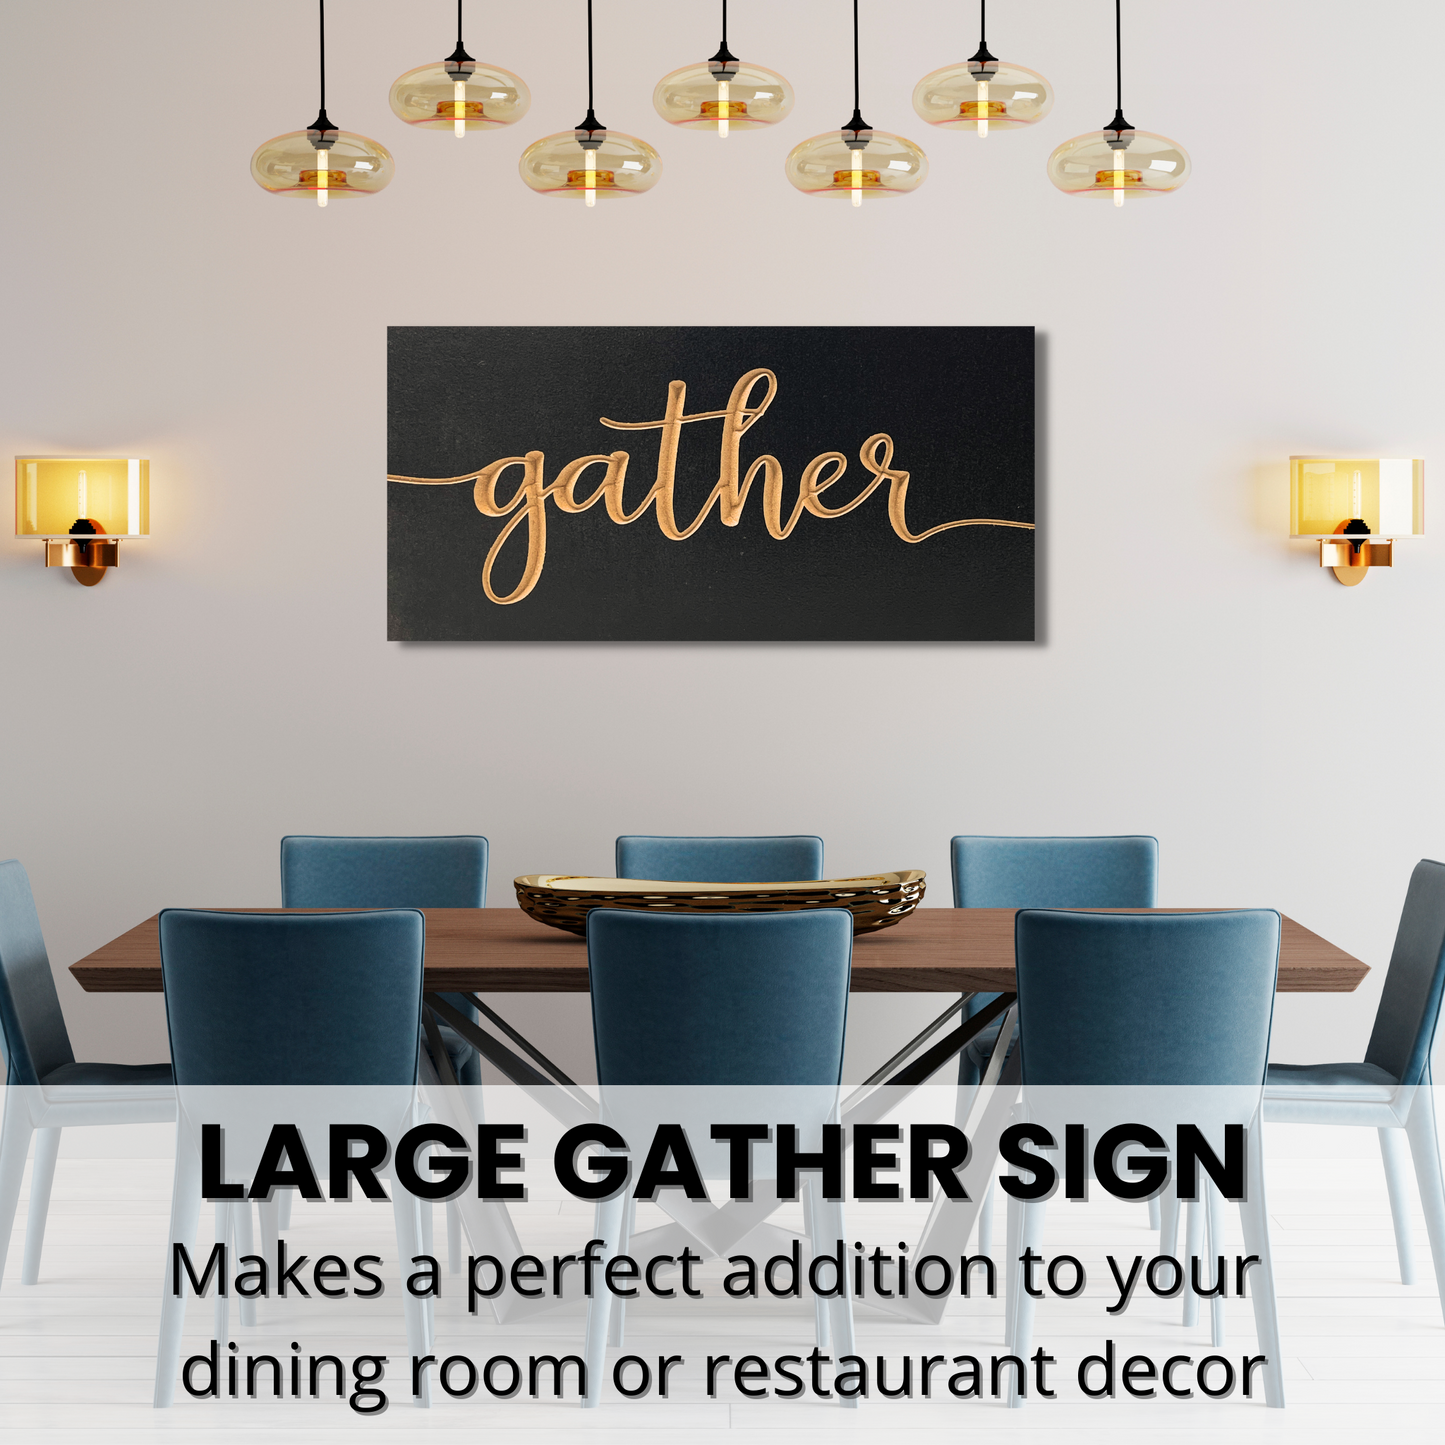 Large Gather Signs for dining room